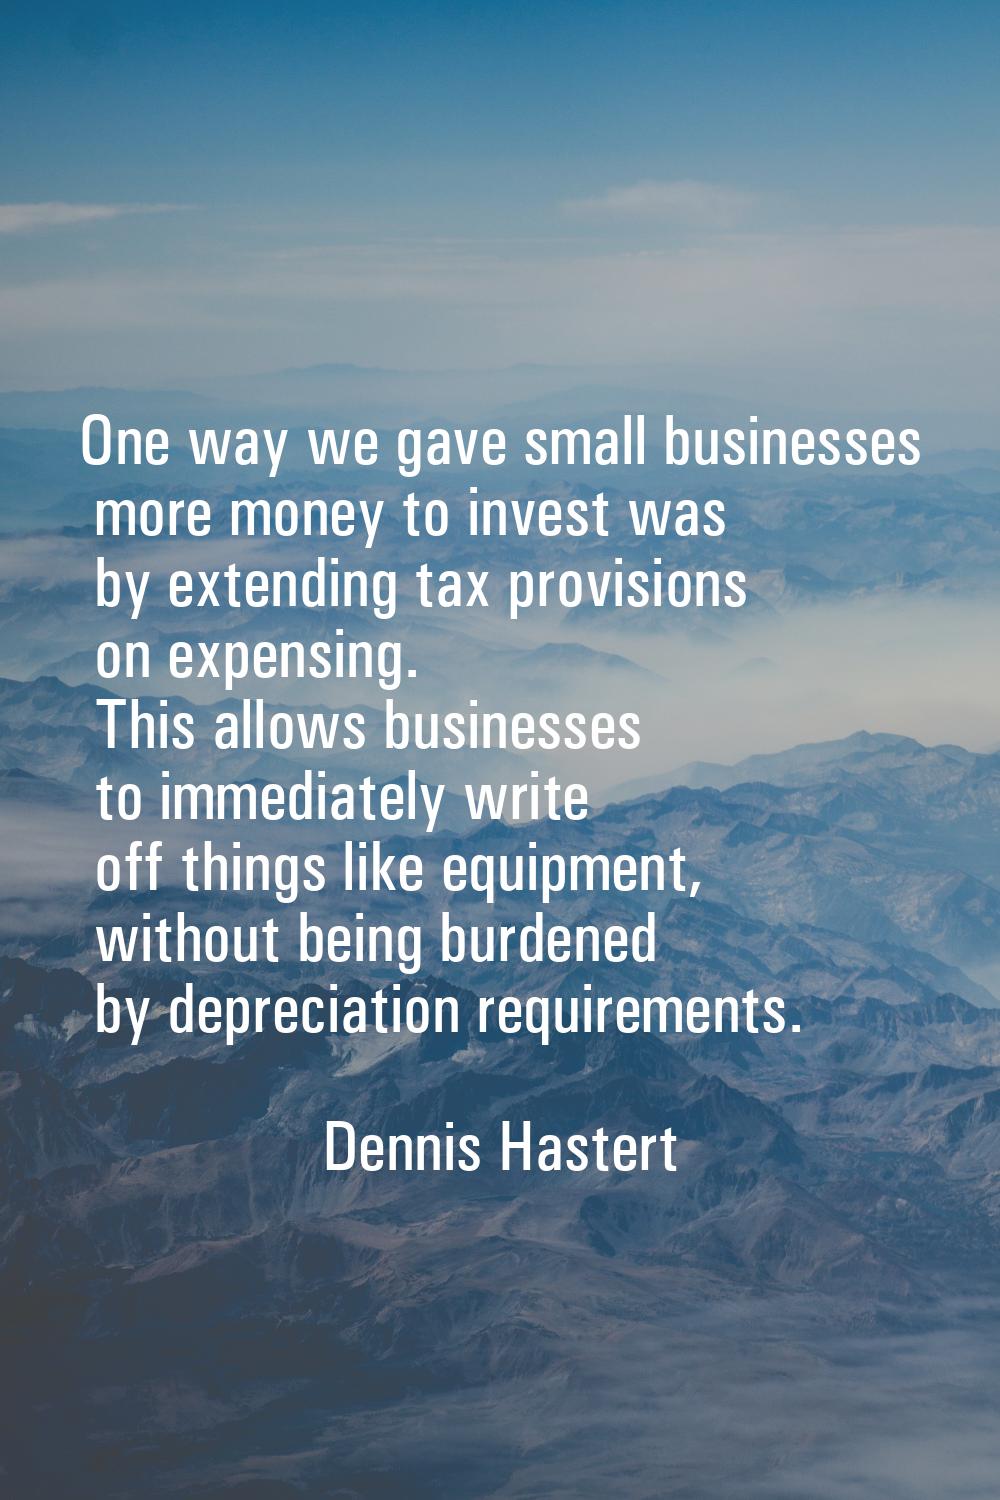 One way we gave small businesses more money to invest was by extending tax provisions on expensing.